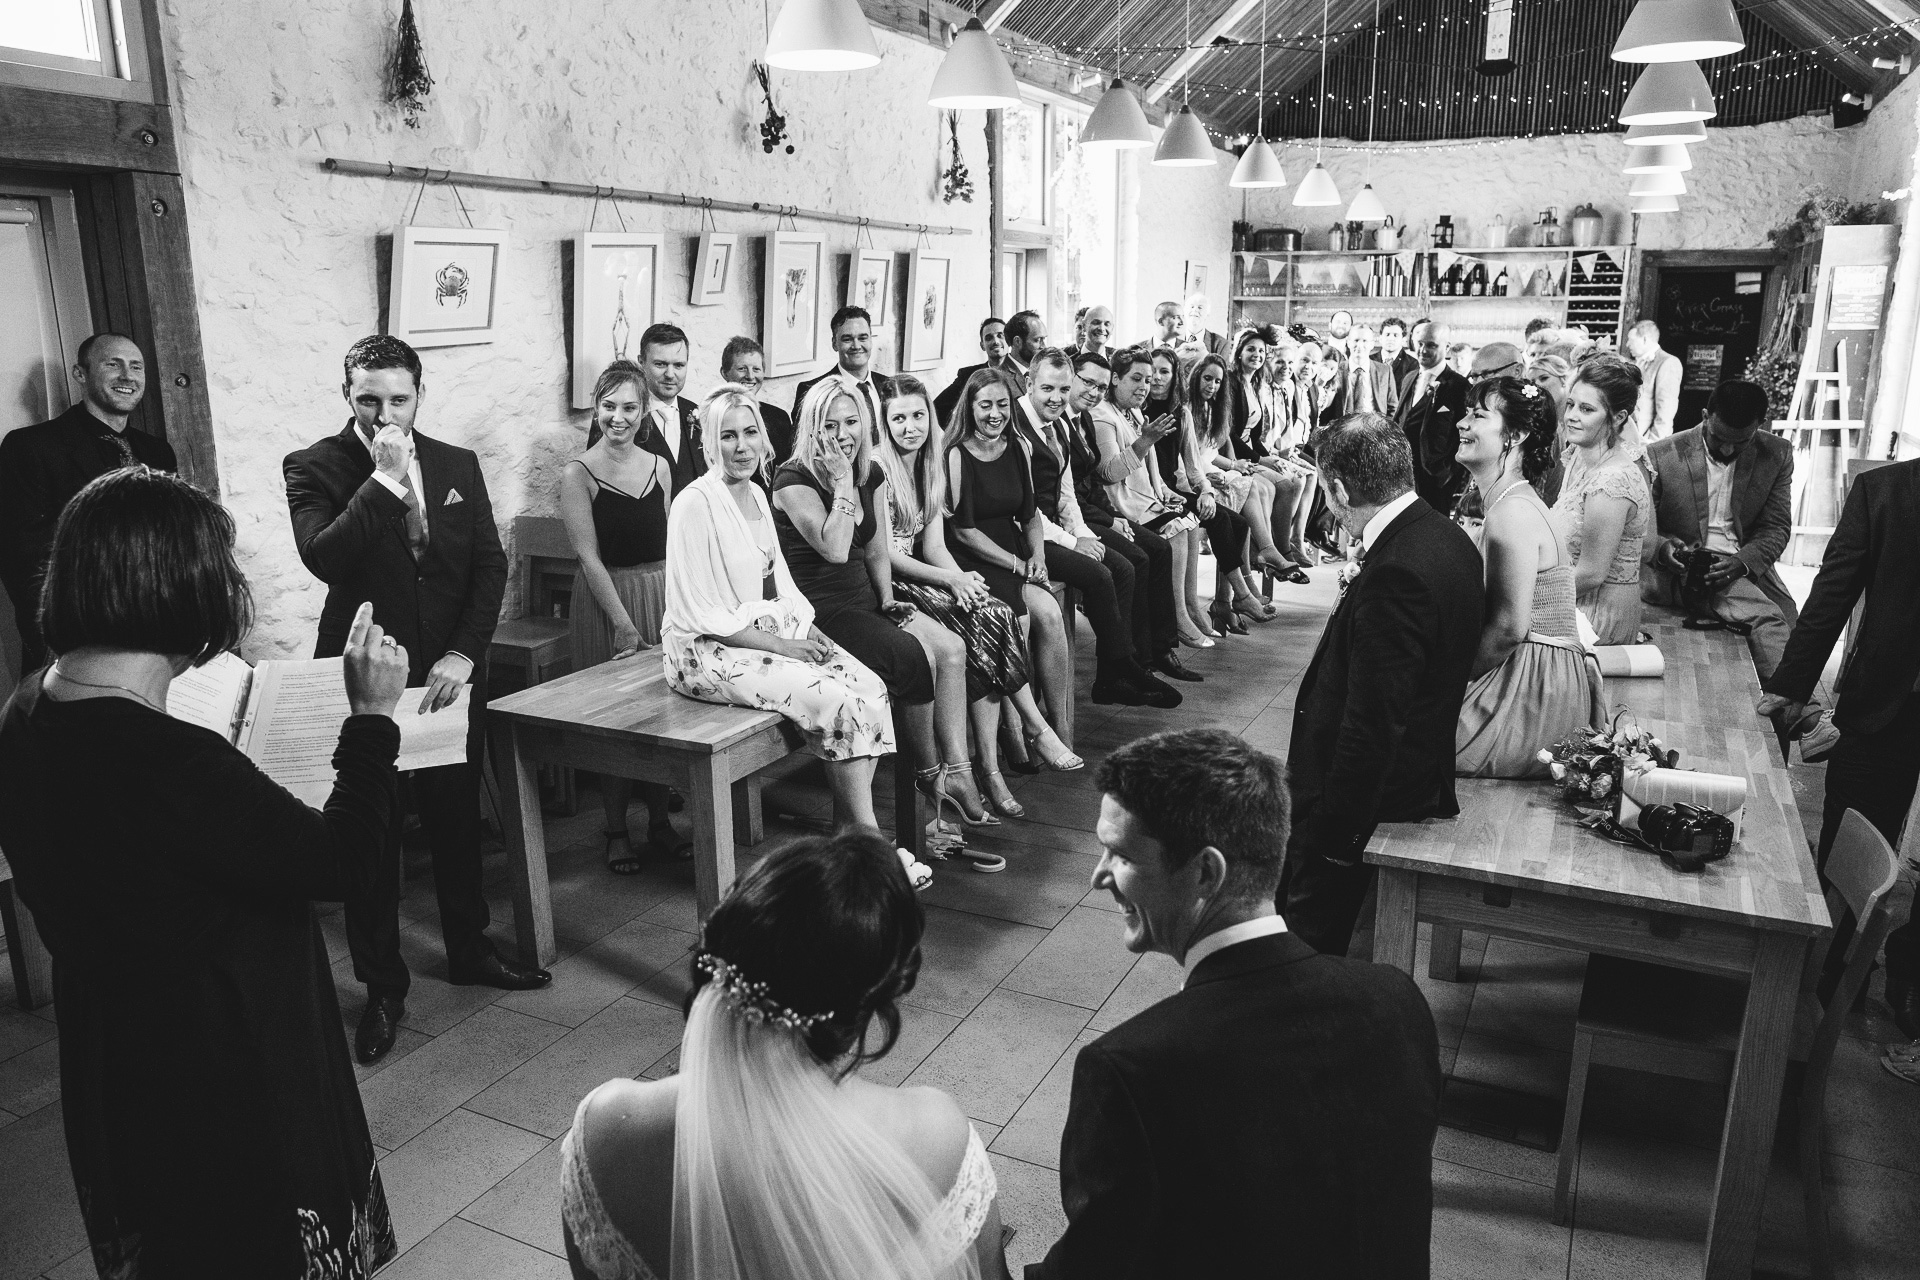 A wedding ceremony with guests sitting on long tables